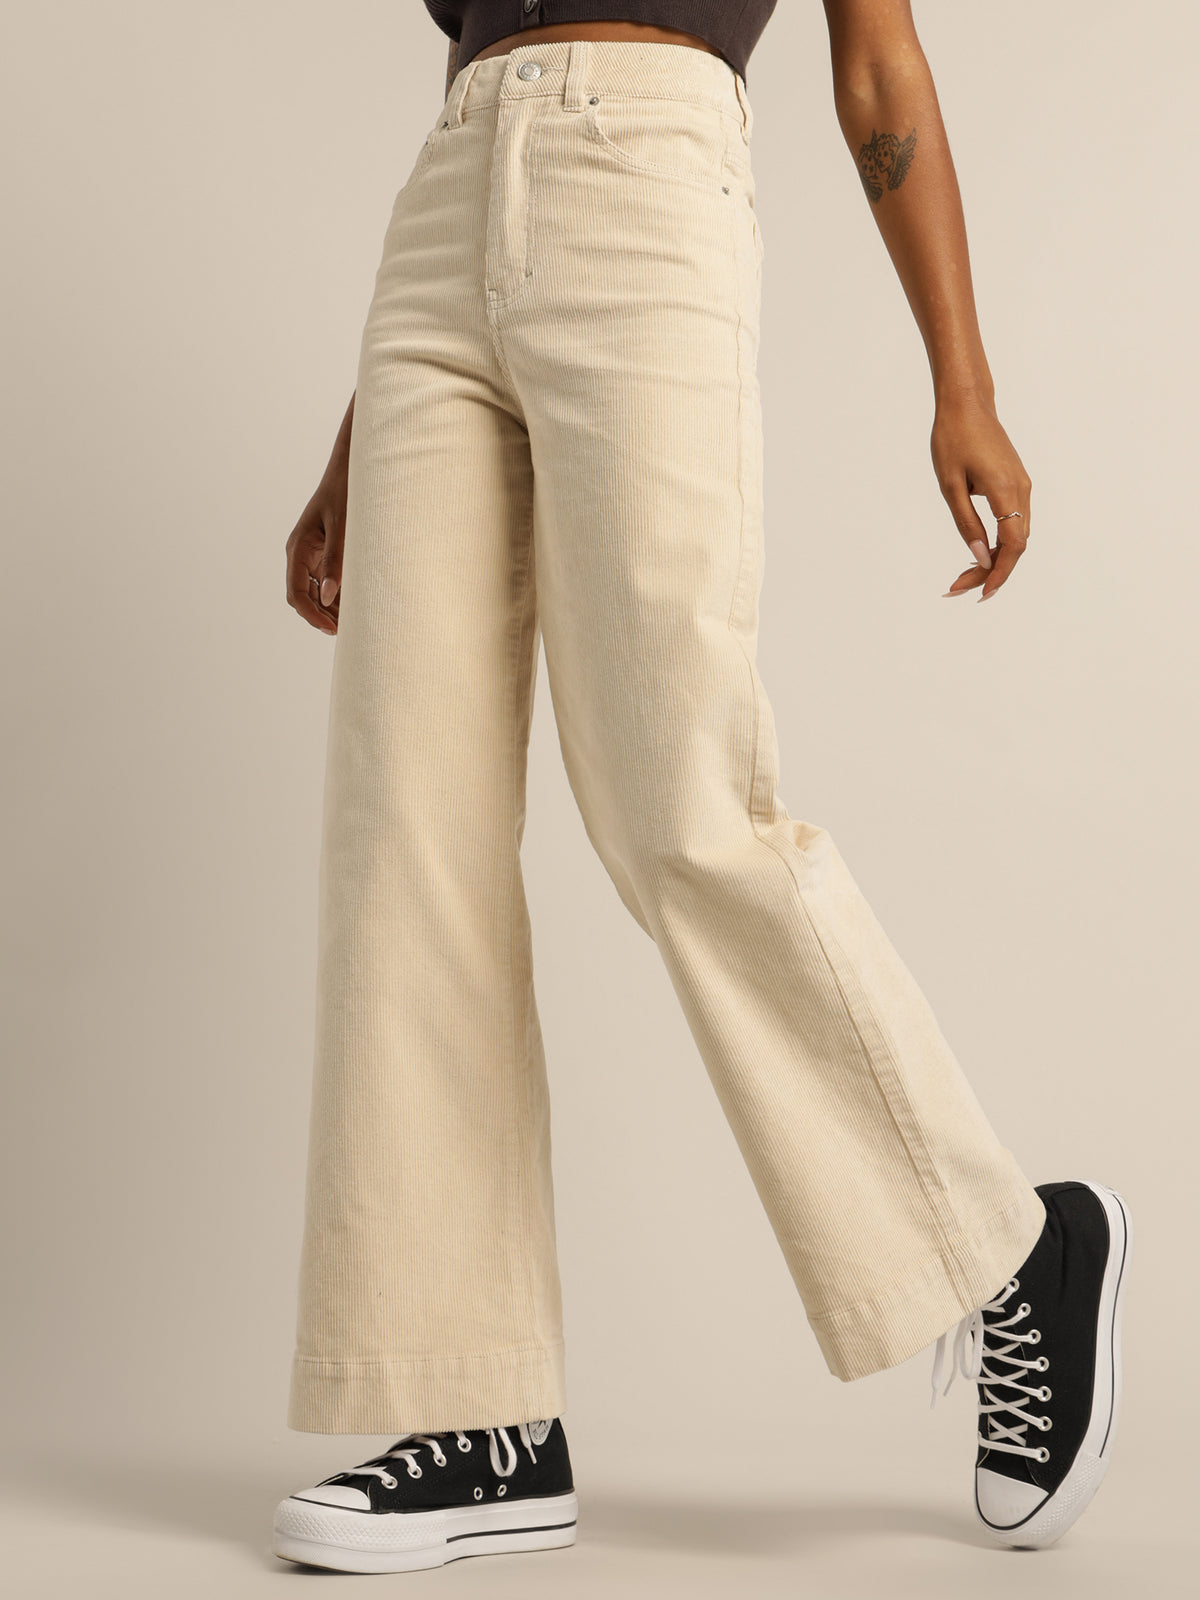 Dahlia Cord Jeans in Off White